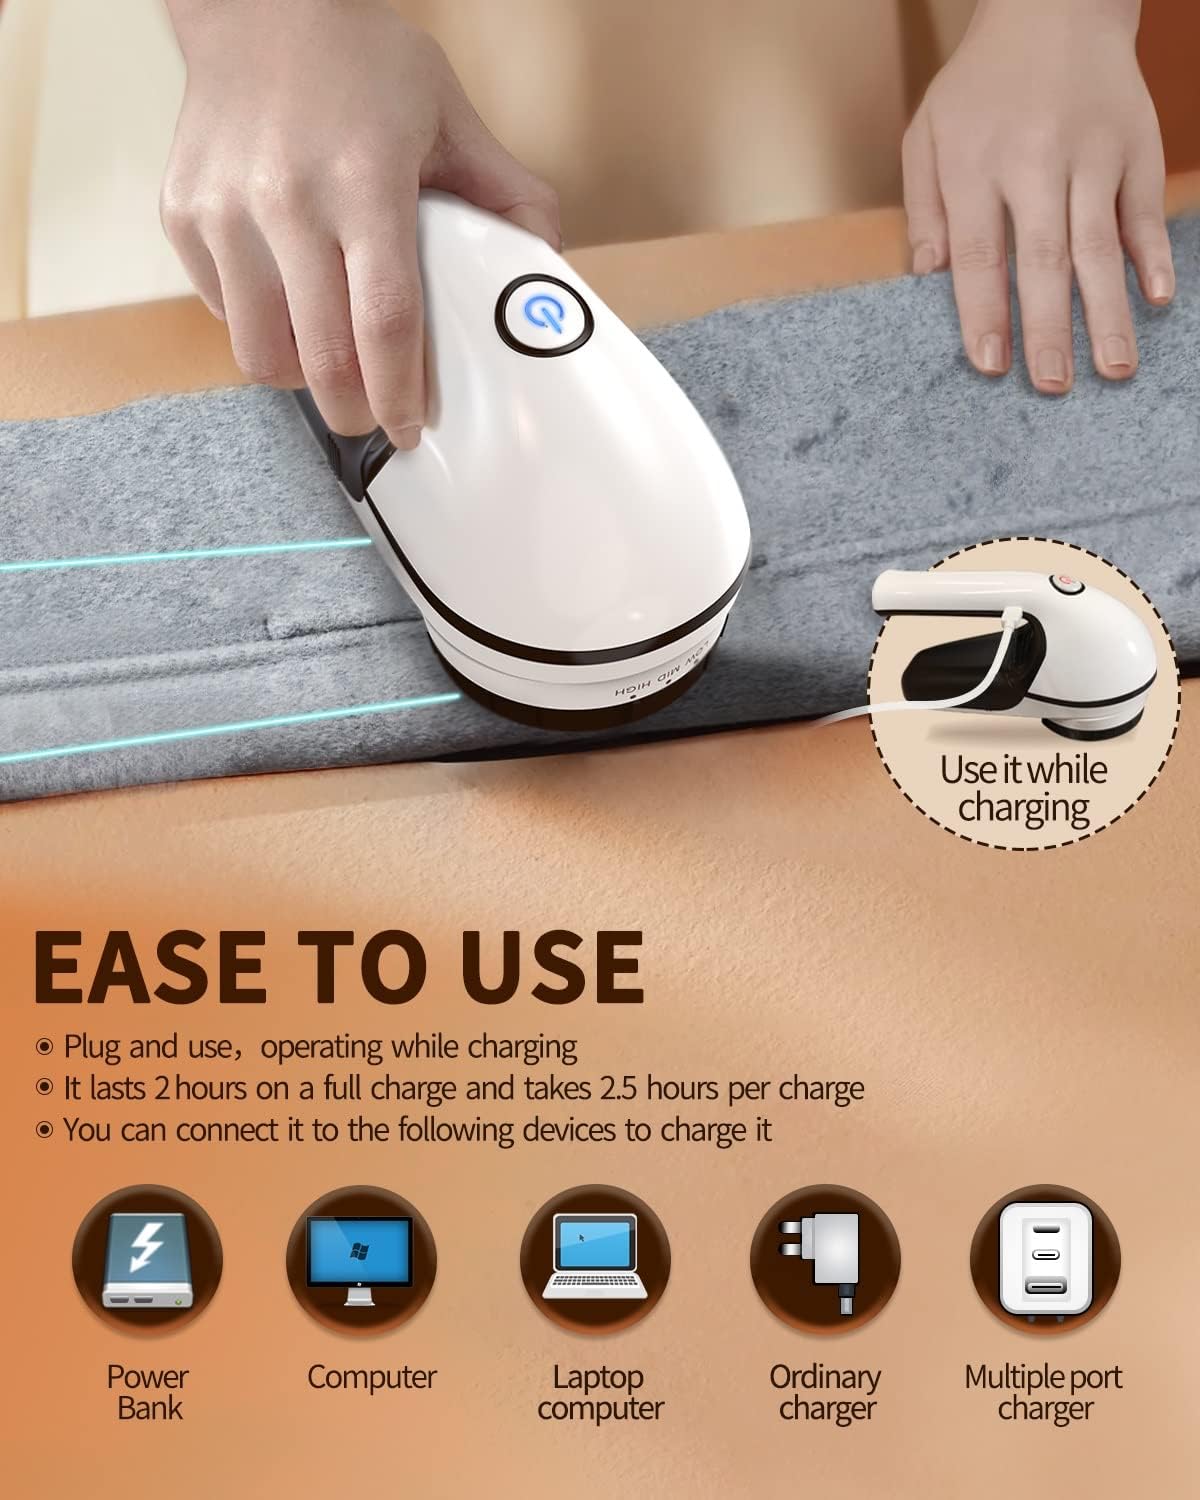 winoon Rechargeable Lint Remover, Fabric Shaver Defuzzer with Large Shaving Area to Remove Fuzz and Pill for Clothes, Sweater, Stocking, Couch, Furniture, Blanket(Gray)